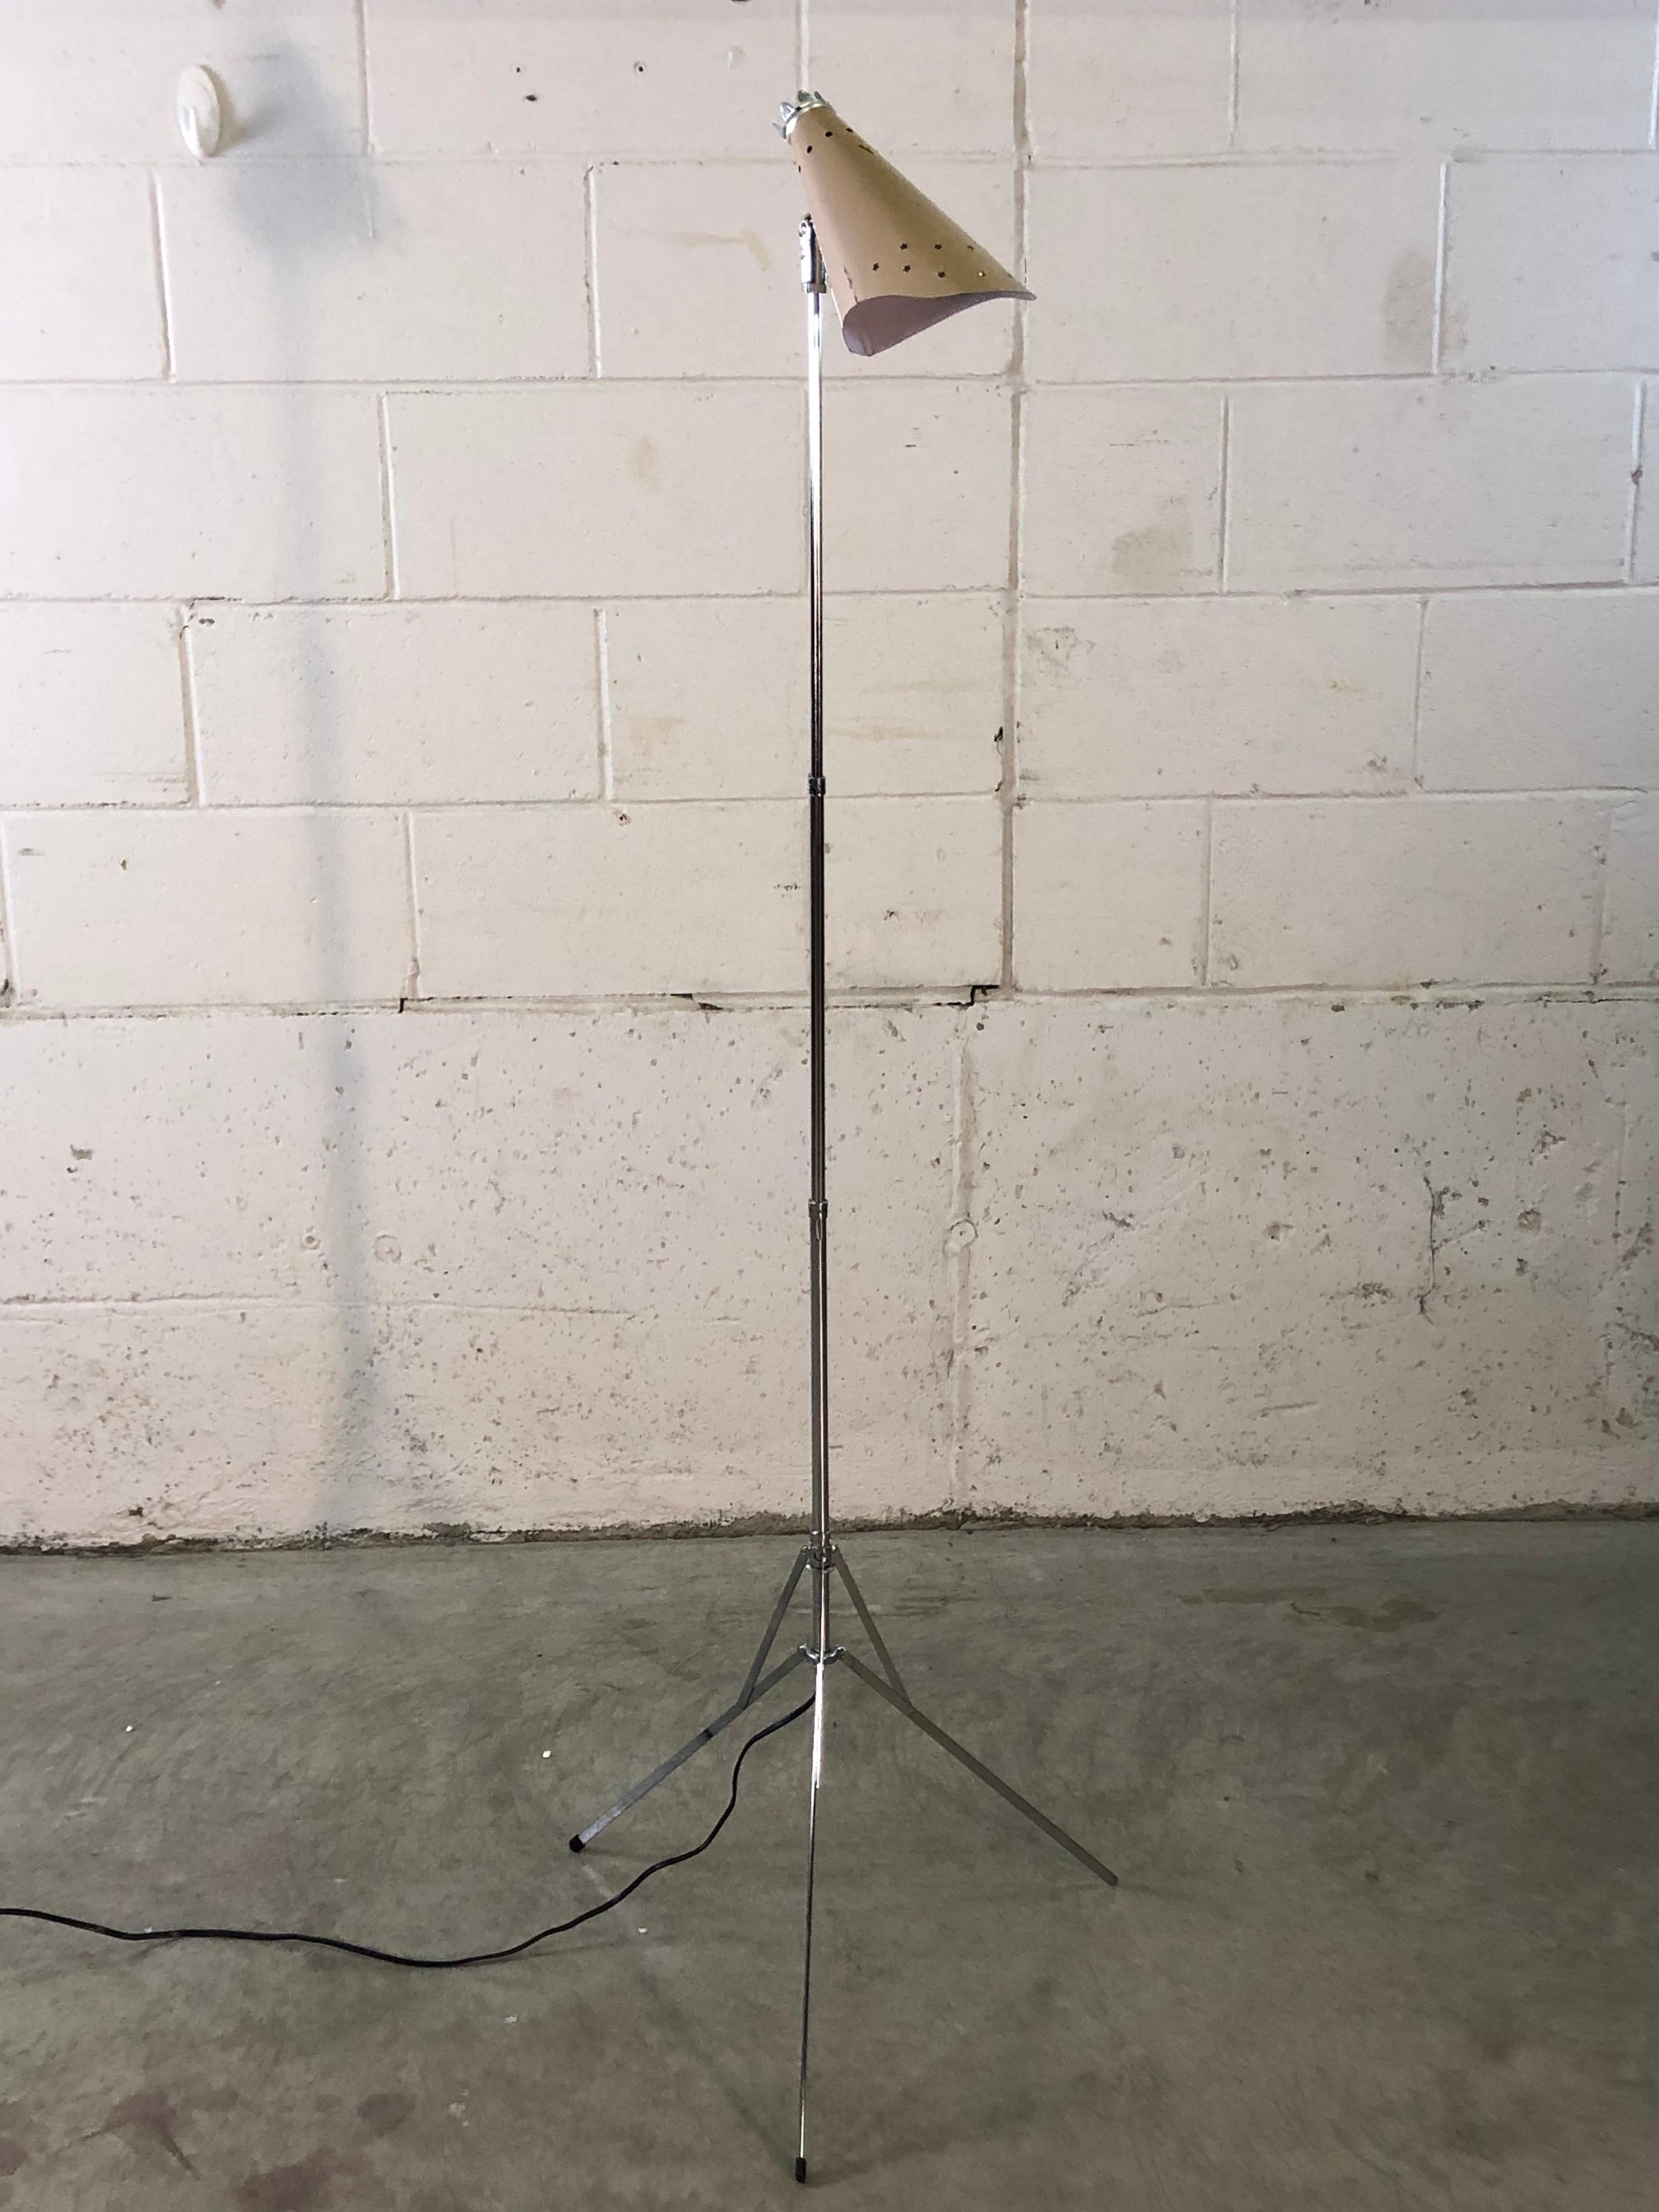 Vintage 1950s Atomic style pink metal and chrome adjustable floor lamp. The lamp fully collapses and folds. The metal shade has a star incised design and the tripod base holds the lamp steady. Wired for the US and in working condition. Fully